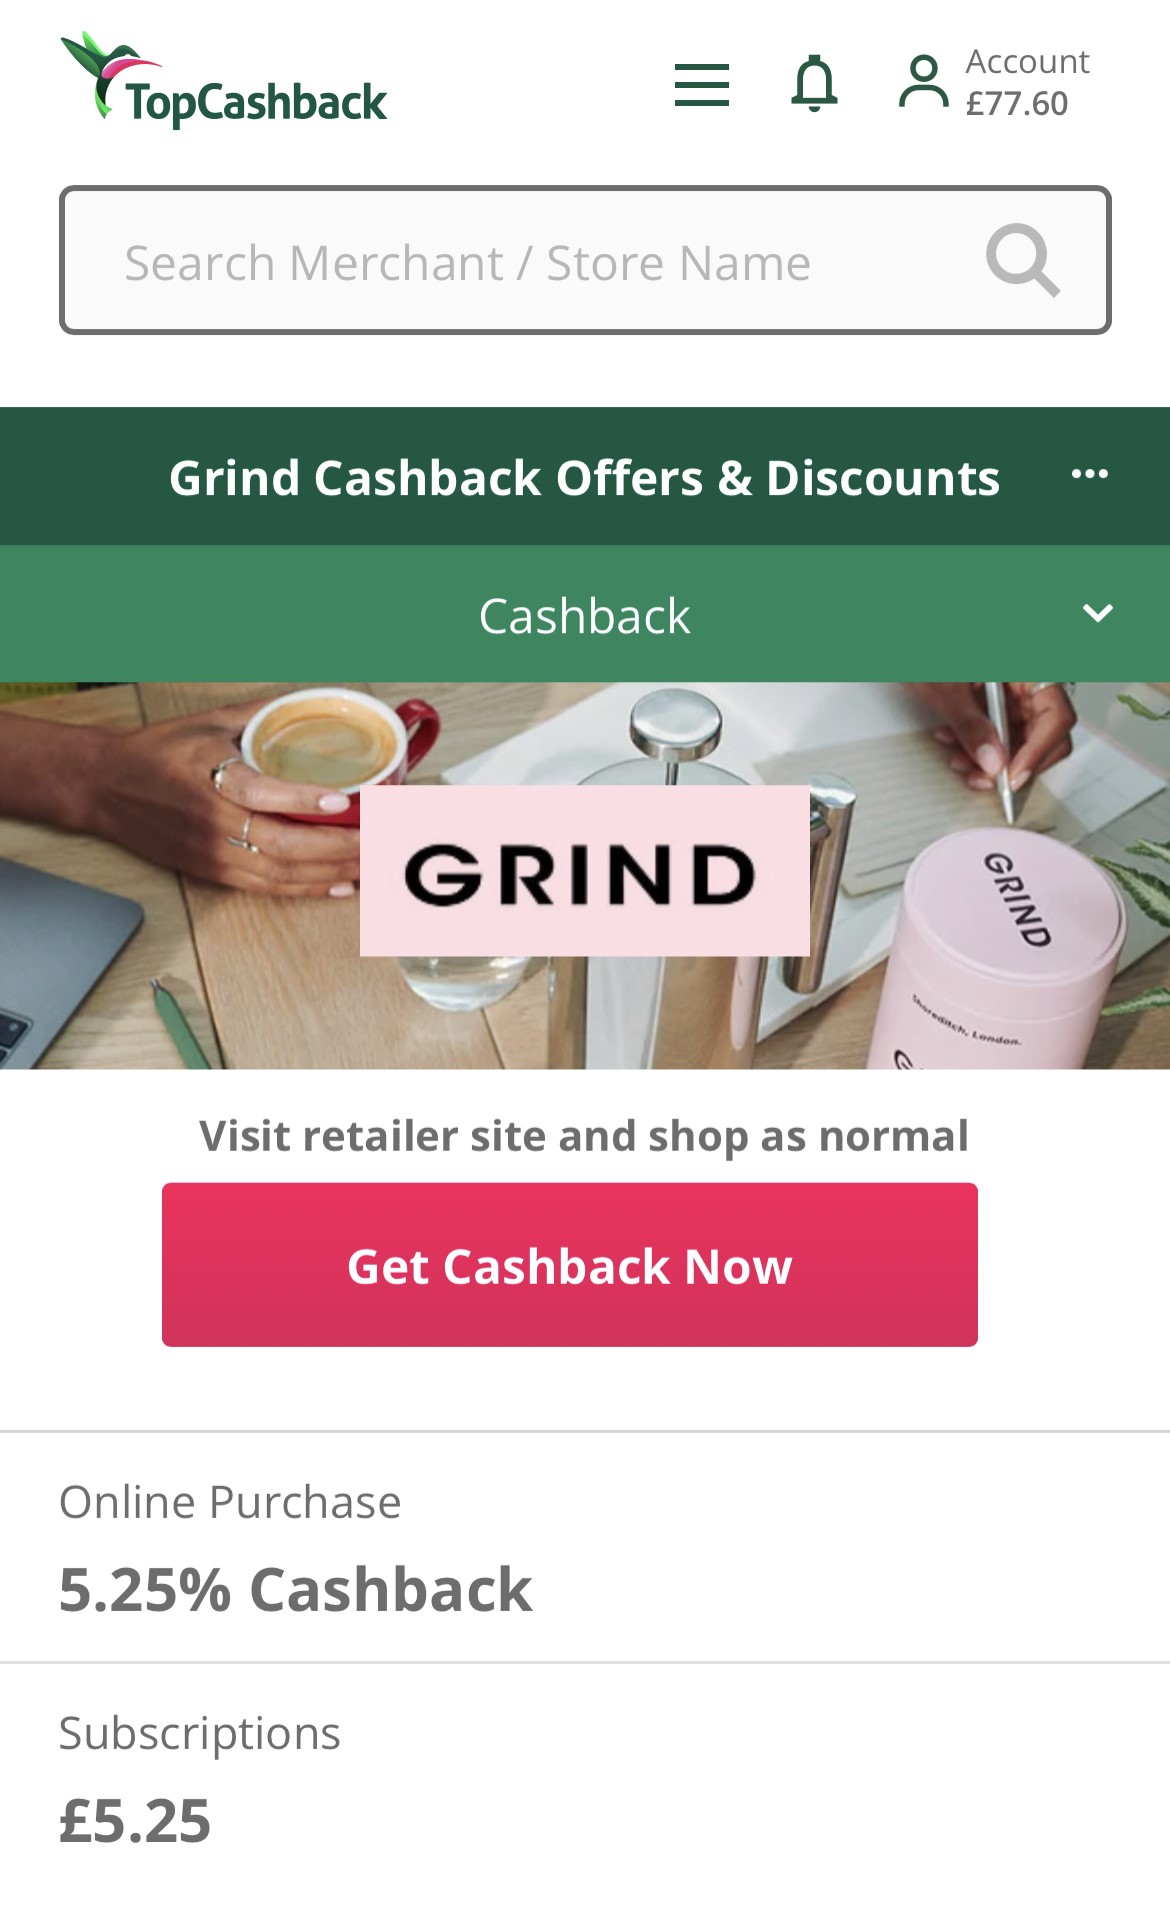 TopCashback offers and discounts mobile